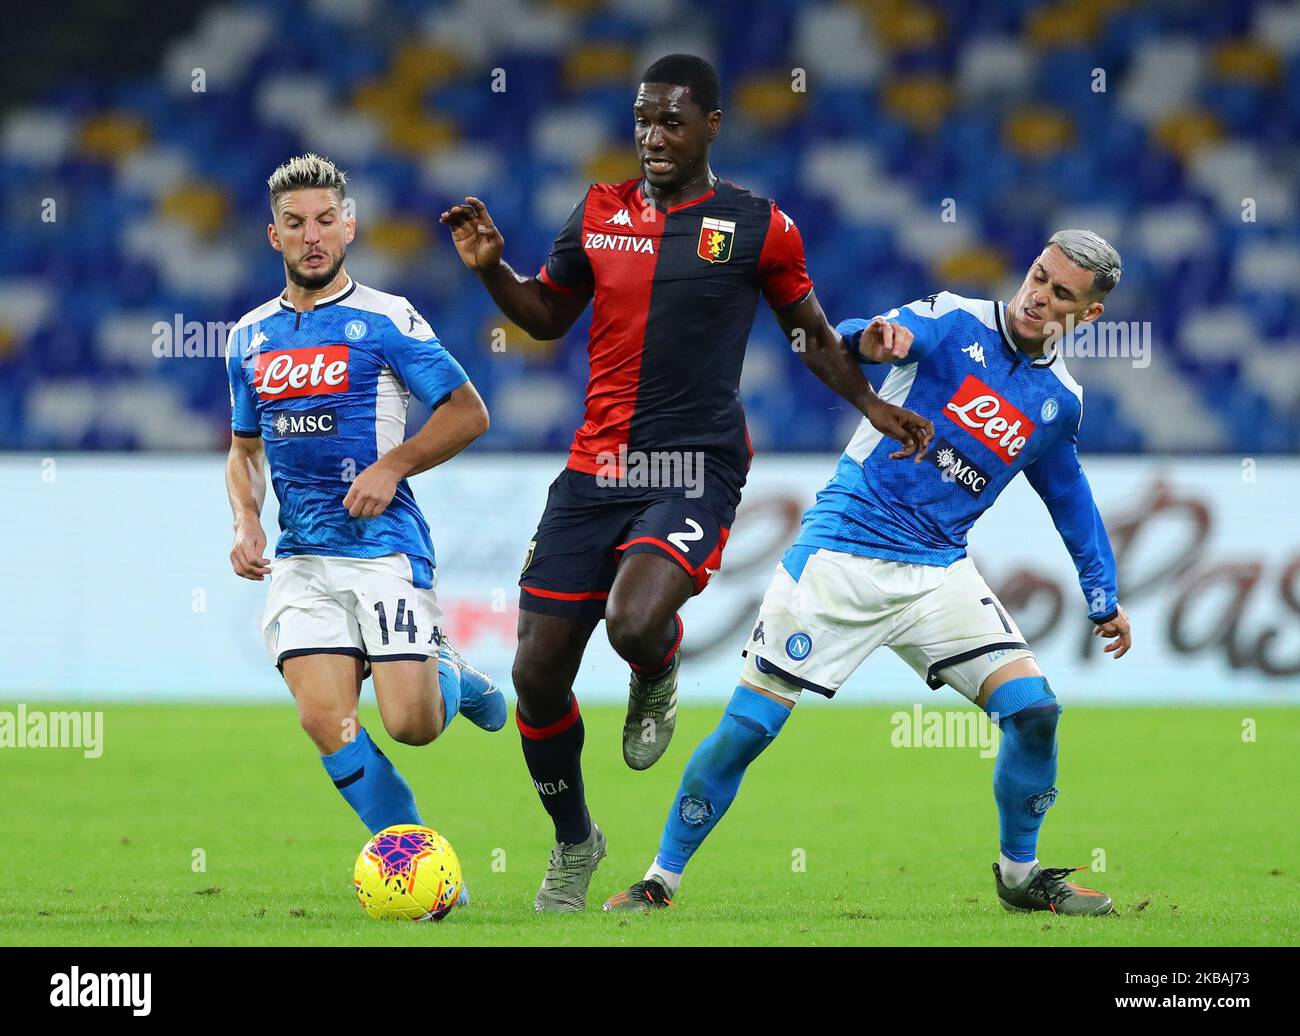 Cristian Zapata of Genoa in action between Dries Mertens and Jose Maria Callejon of Napoli during the Serie A match Napoli v Genoa at the San Paolo Stadium in Naples, Italy on November 9, 2019 (Photo by Matteo Ciambelli/NurPhoto) Stock Photo